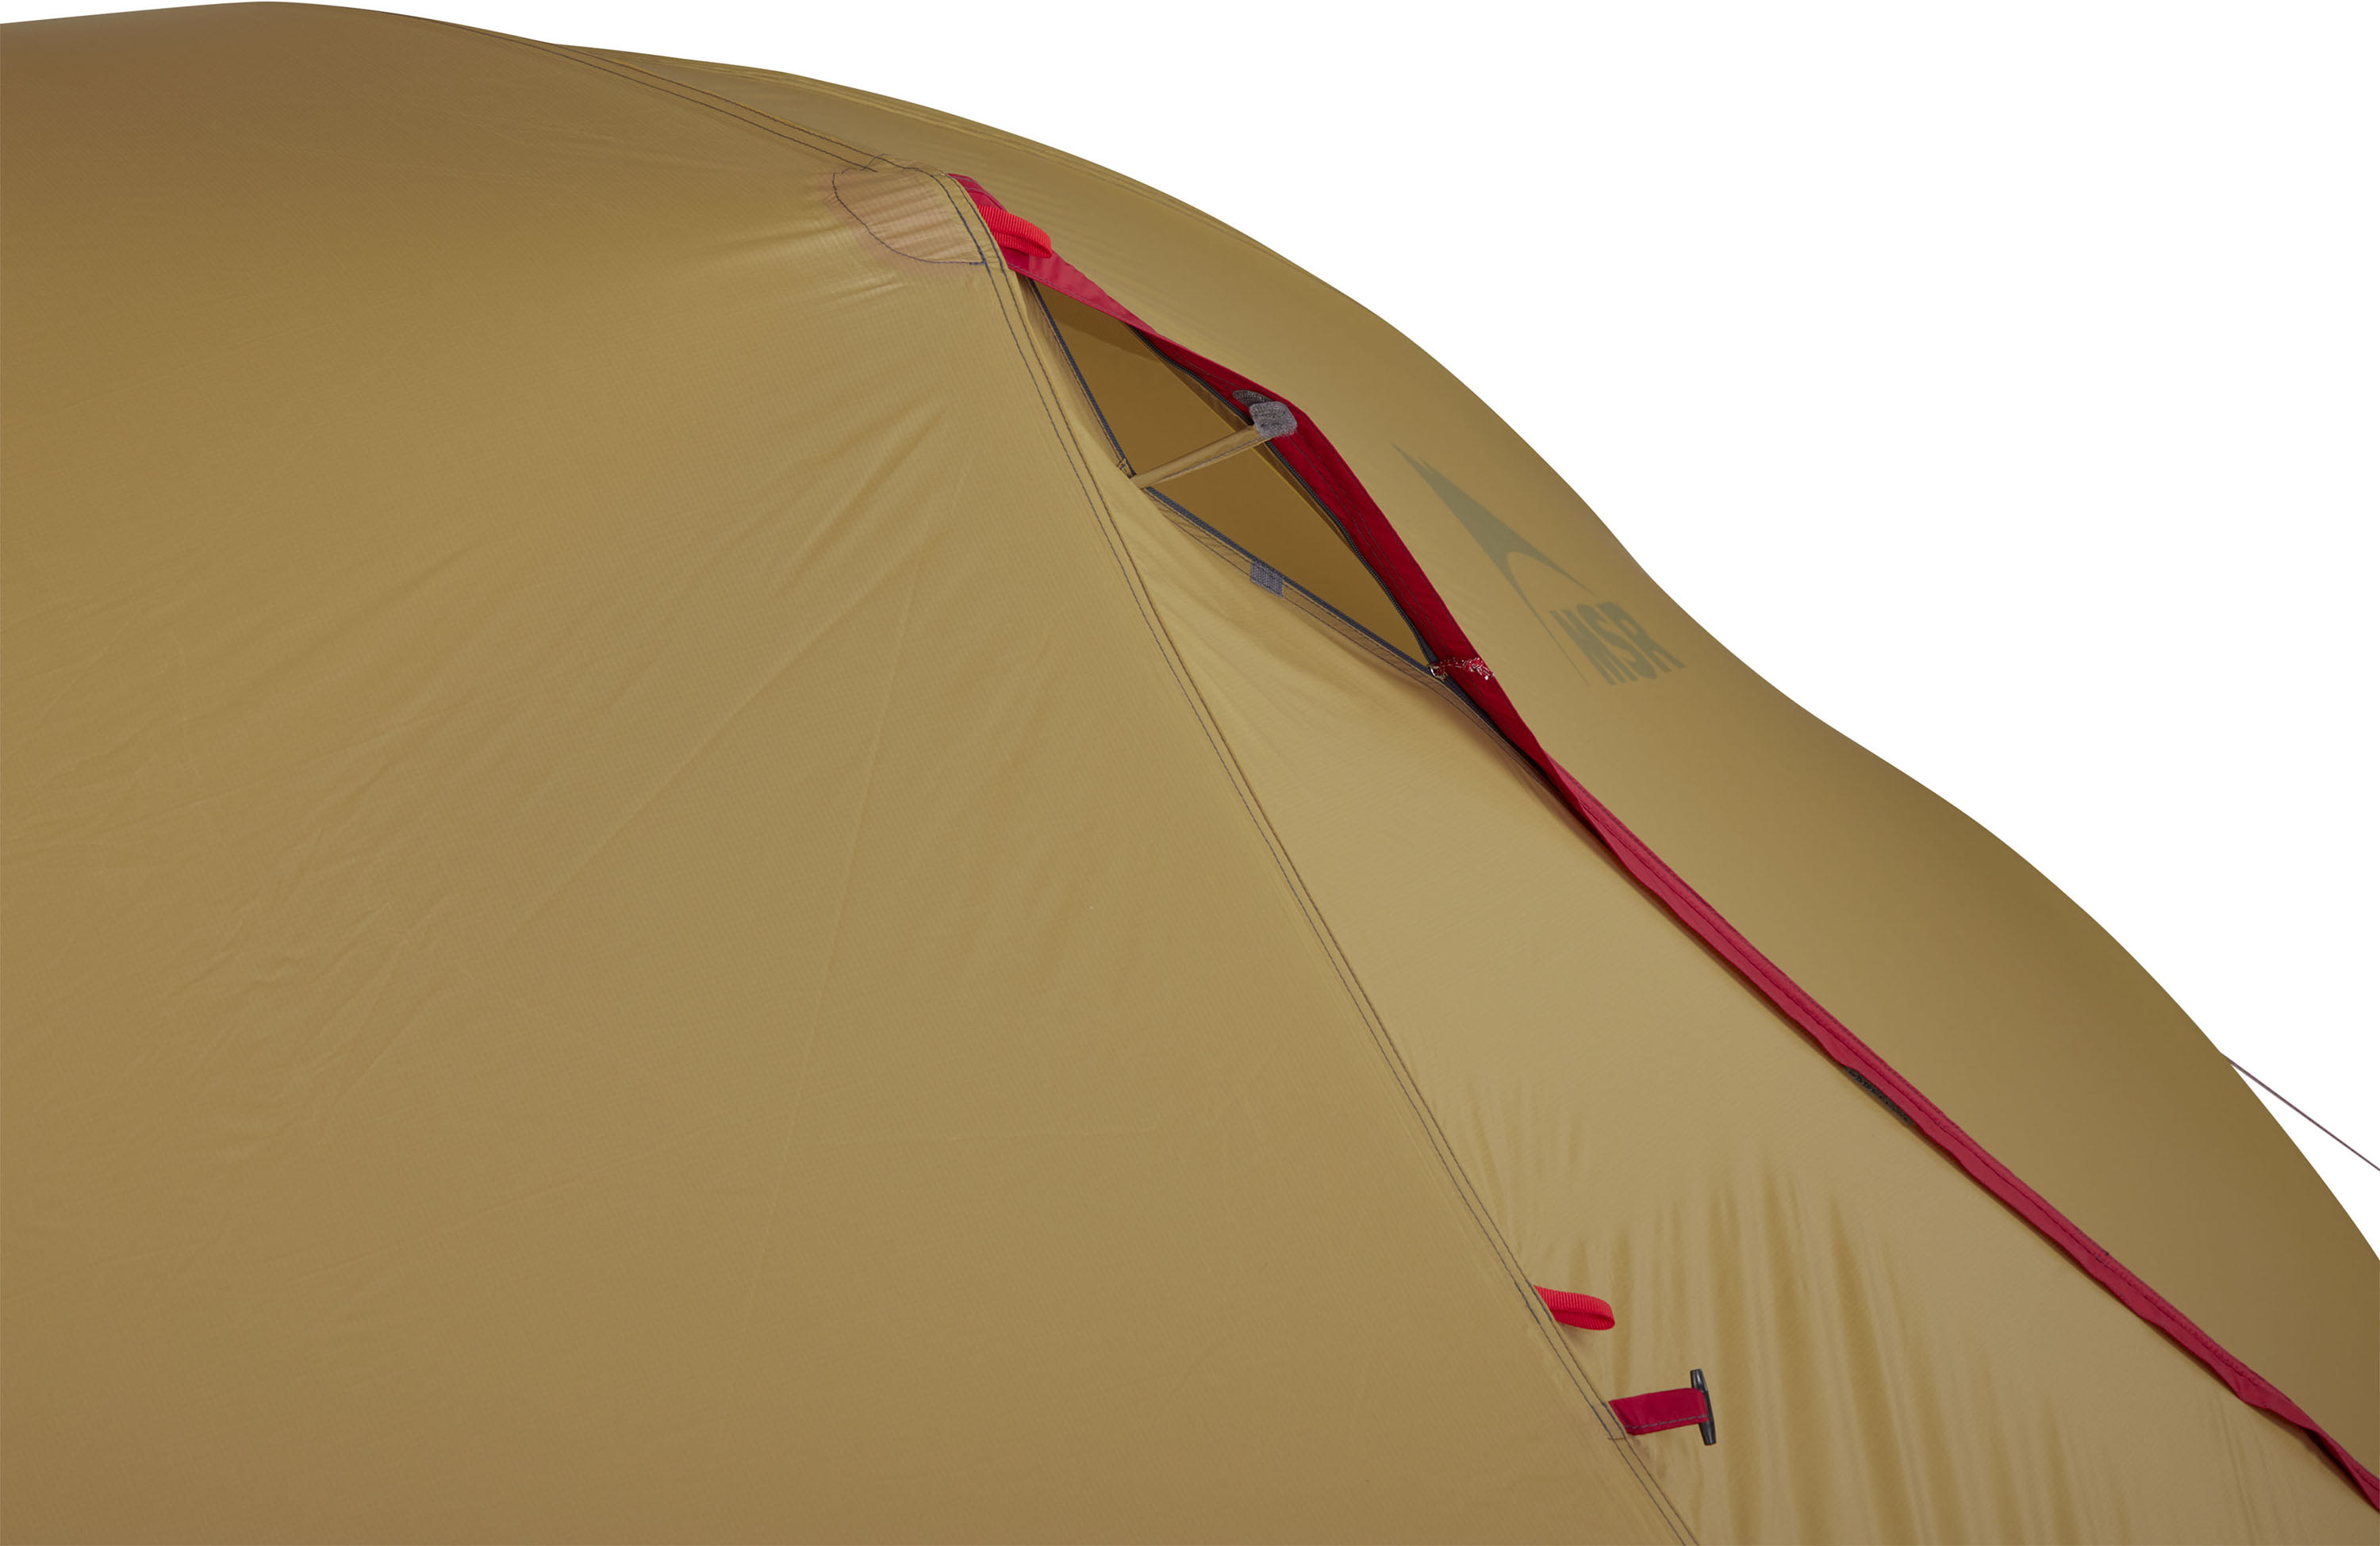 MSR® Hubba Hubba™ 2-Person Backpacking Tent